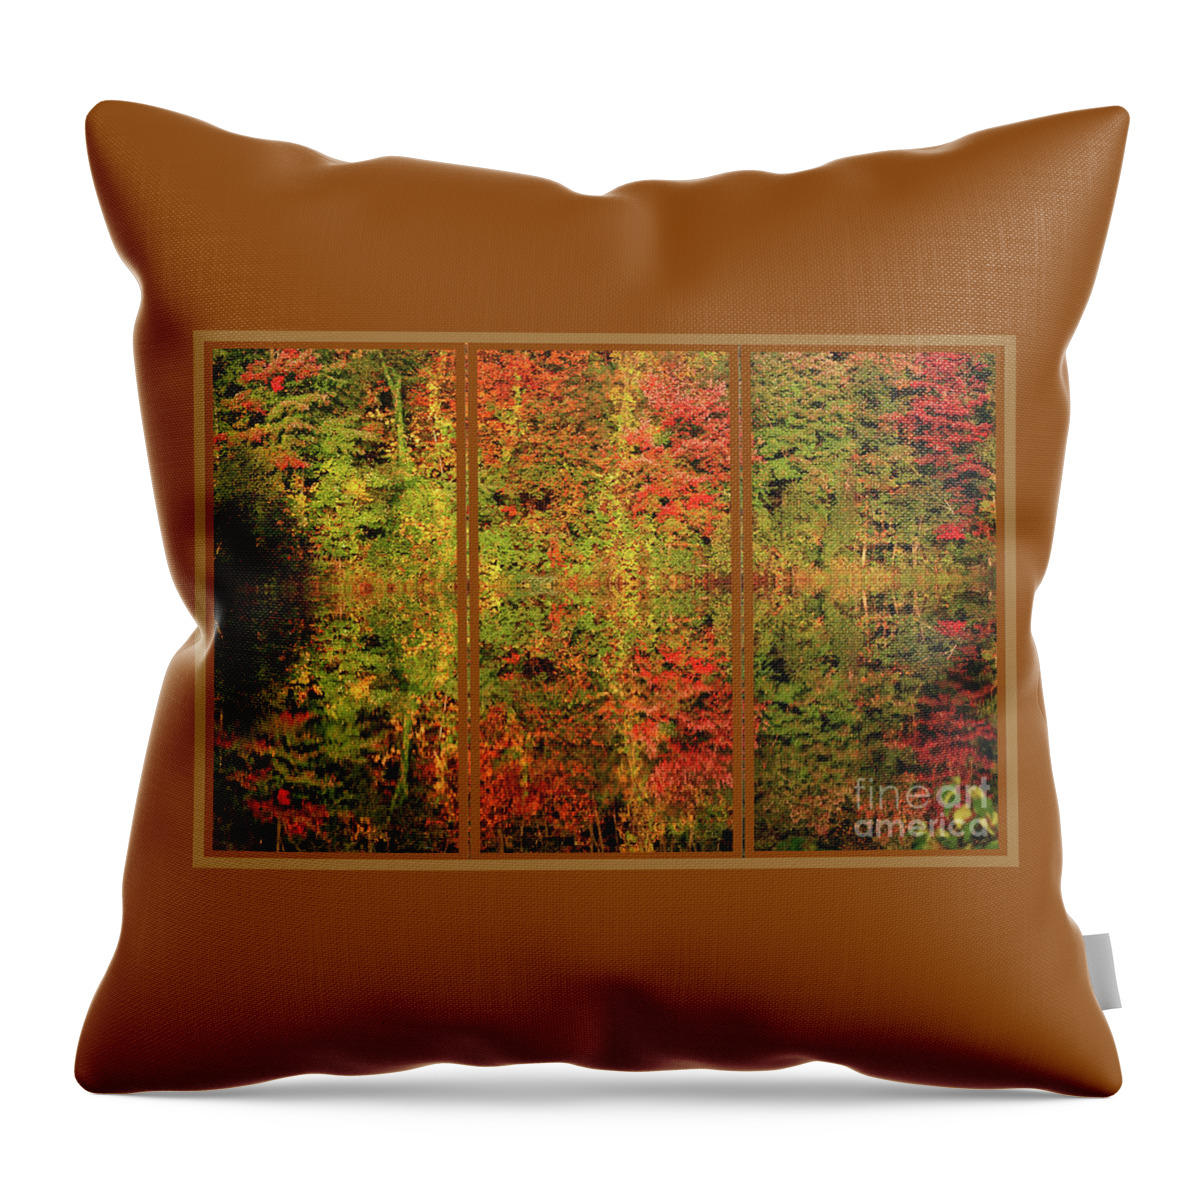 Autumn Throw Pillow featuring the photograph Autumn Reflections In A Window by Smilin Eyes Treasures